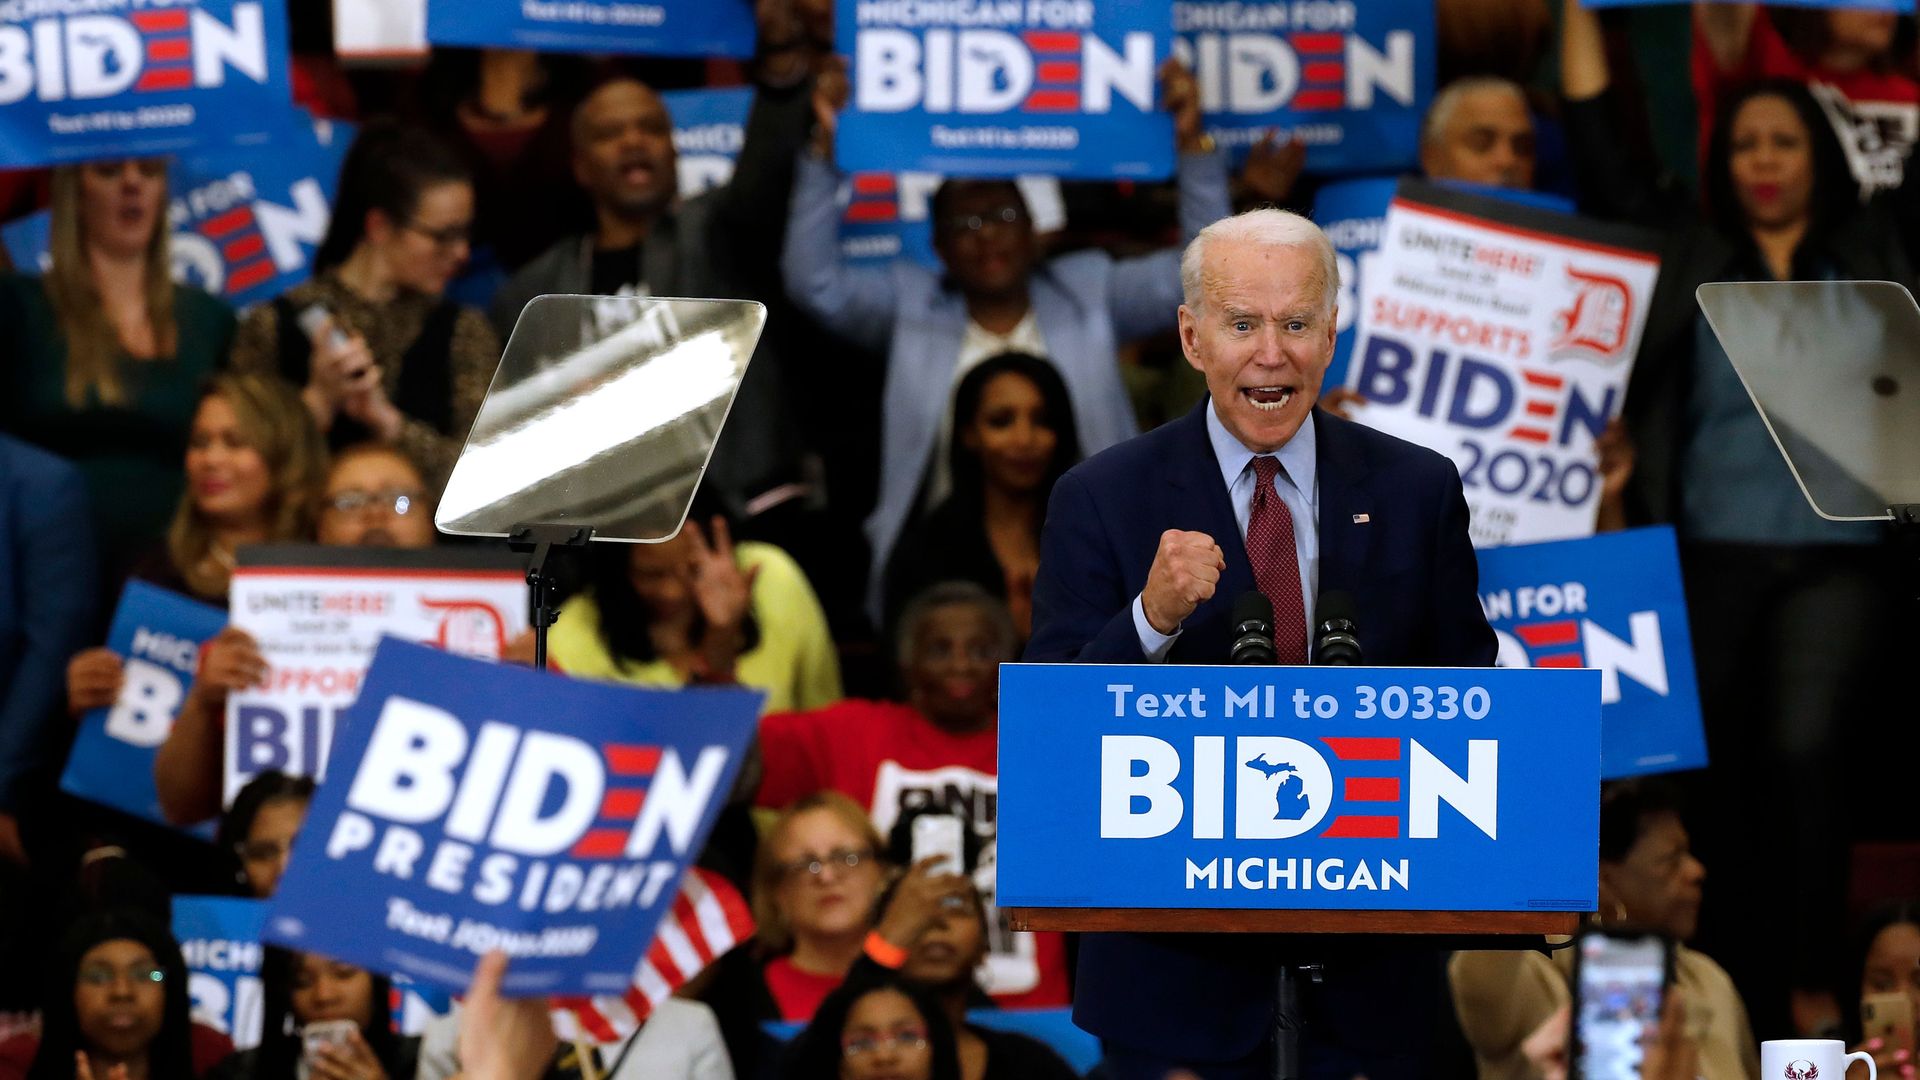 Democratic presidential candidate former Vice President Joe Biden gestures as he speaks during a campaign rally at Renaissance High School in Detroit, Michigan on March 9